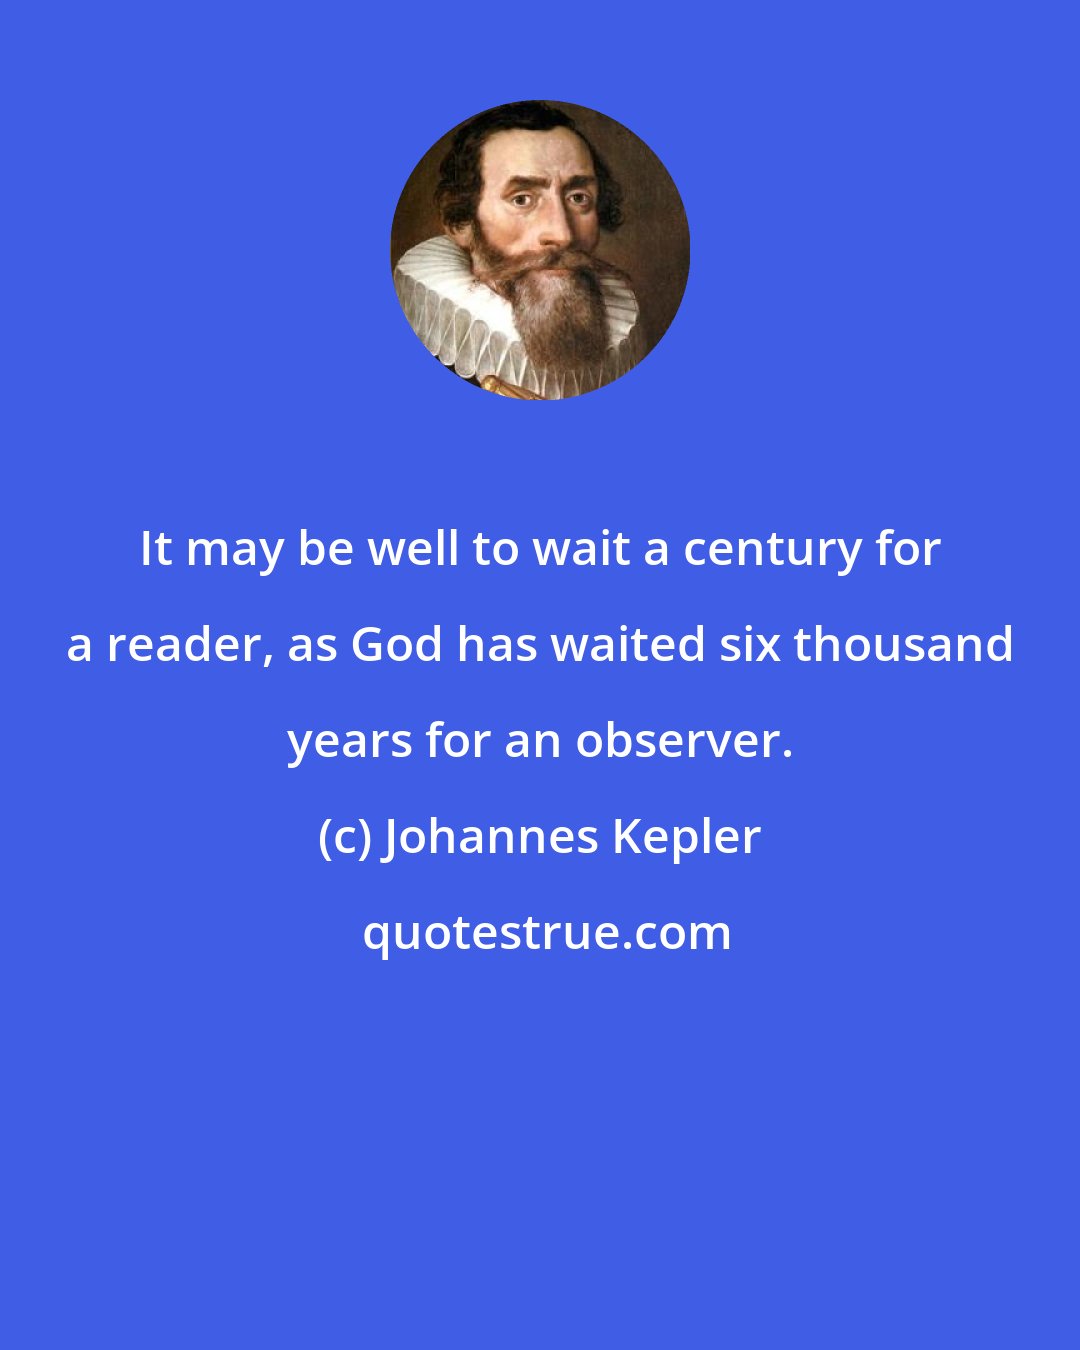 Johannes Kepler: It may be well to wait a century for a reader, as God has waited six thousand years for an observer.